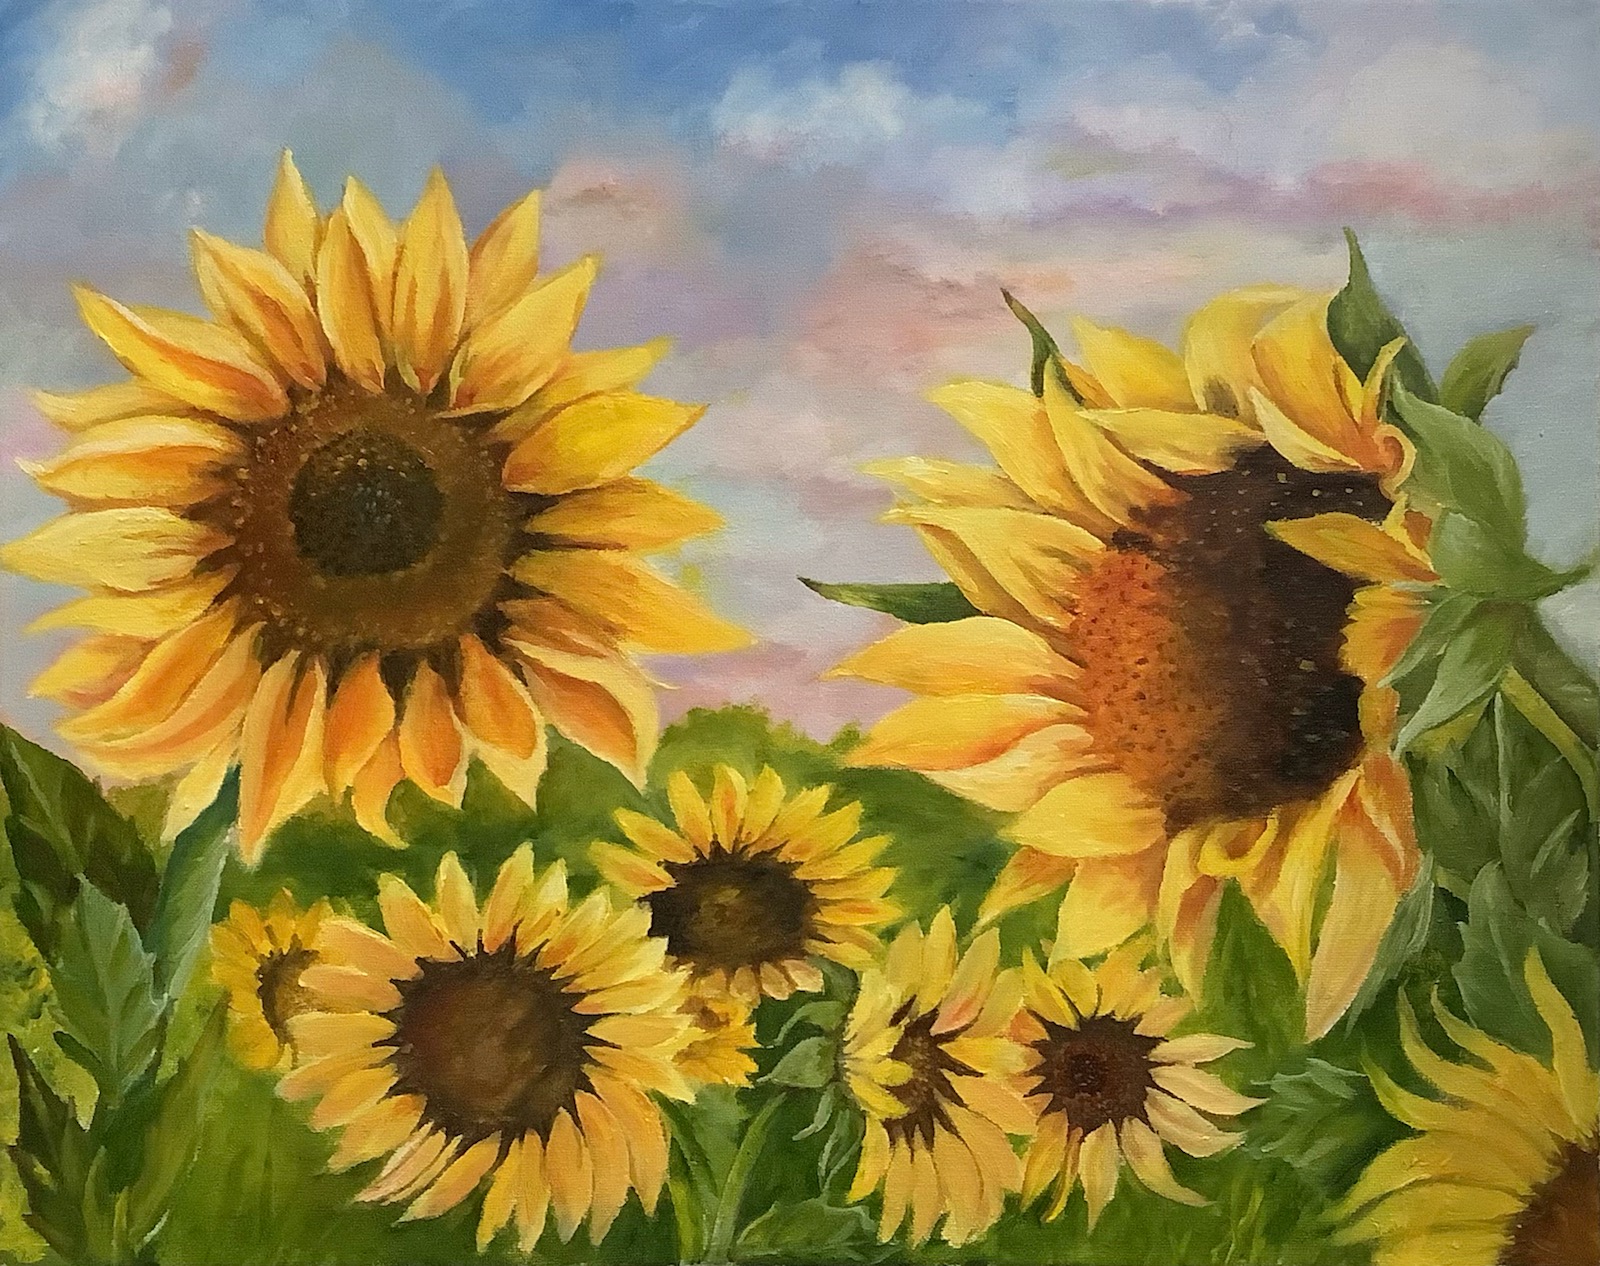 Facing The Giants.(Sunflowers) by Janis Clary "O". 16x20" oil painting on canvas. Fine art for sale, home and office decor. Abstract, realism, impressionism. Stuart, Martin County, Treasure Coast, Florida. MartinArts, Martin Artisans Guild. Martin County Open Studio Tour